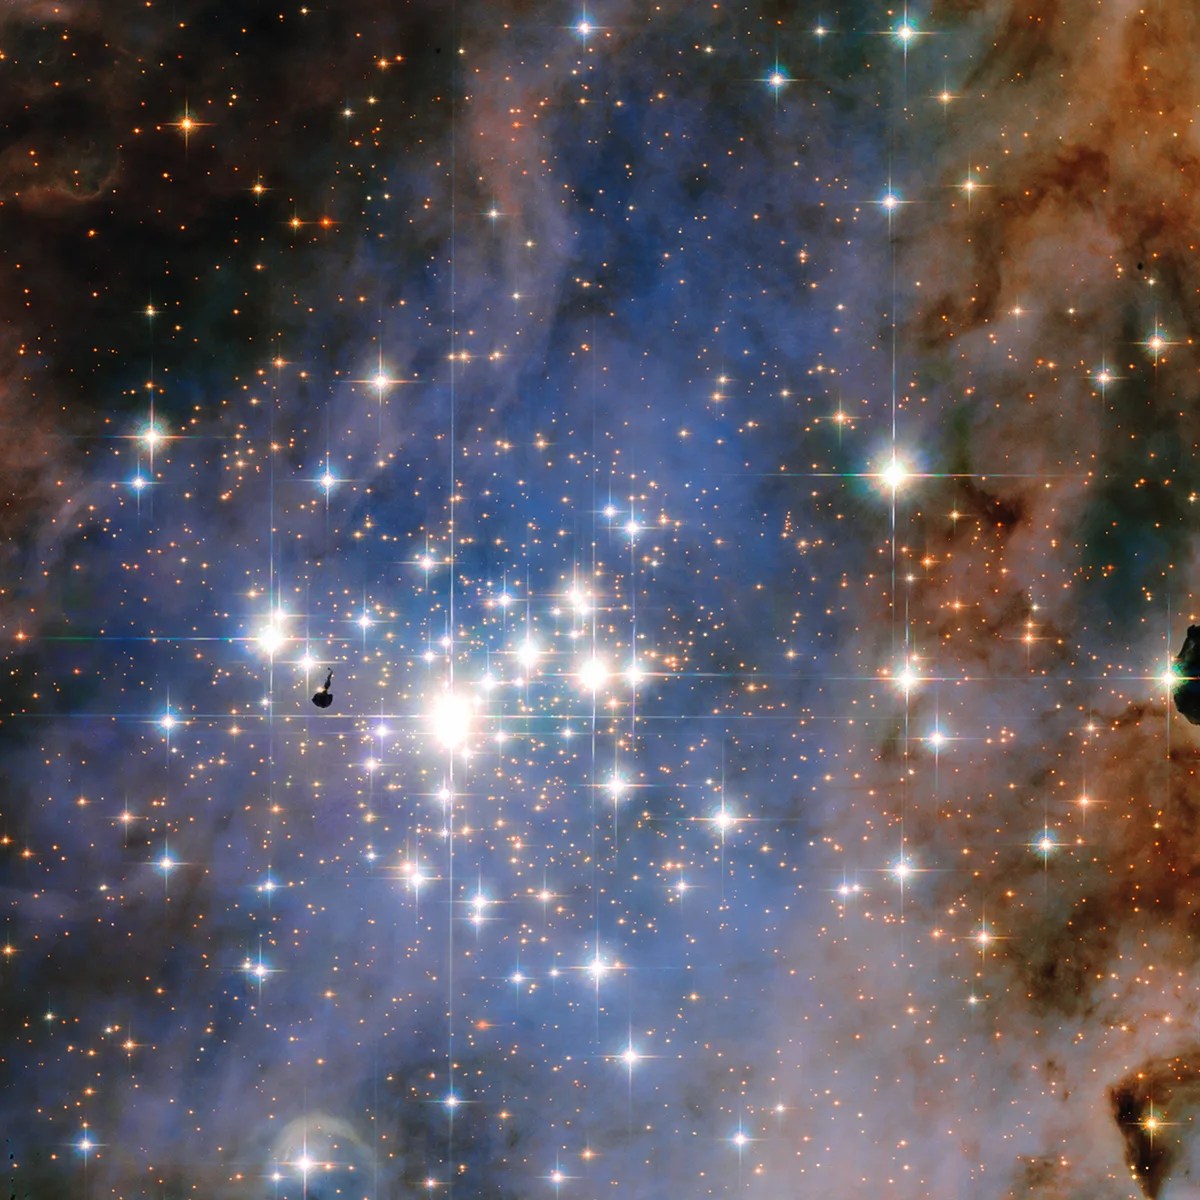 A glittering star cluster surrounded by blue and purple gas, with pink and reddish-brown gas along the edges.